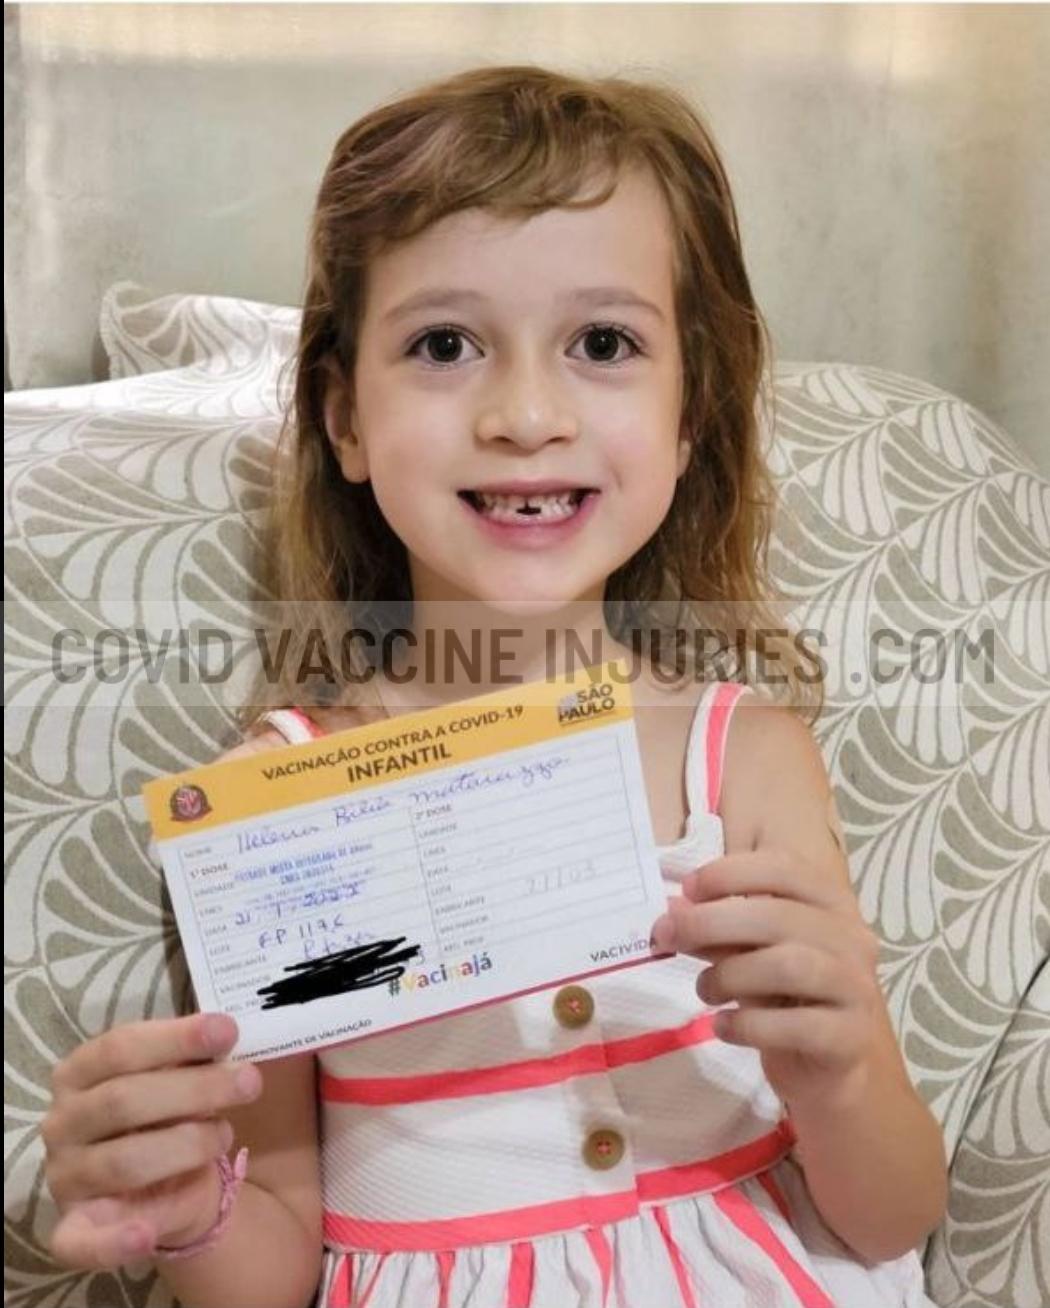 1000% Increase in Vaccine Deaths and Injuries Following Pfizer COVID-19 EUA Vaccine for 5 to 11 Year Olds Helena-vaccine-card